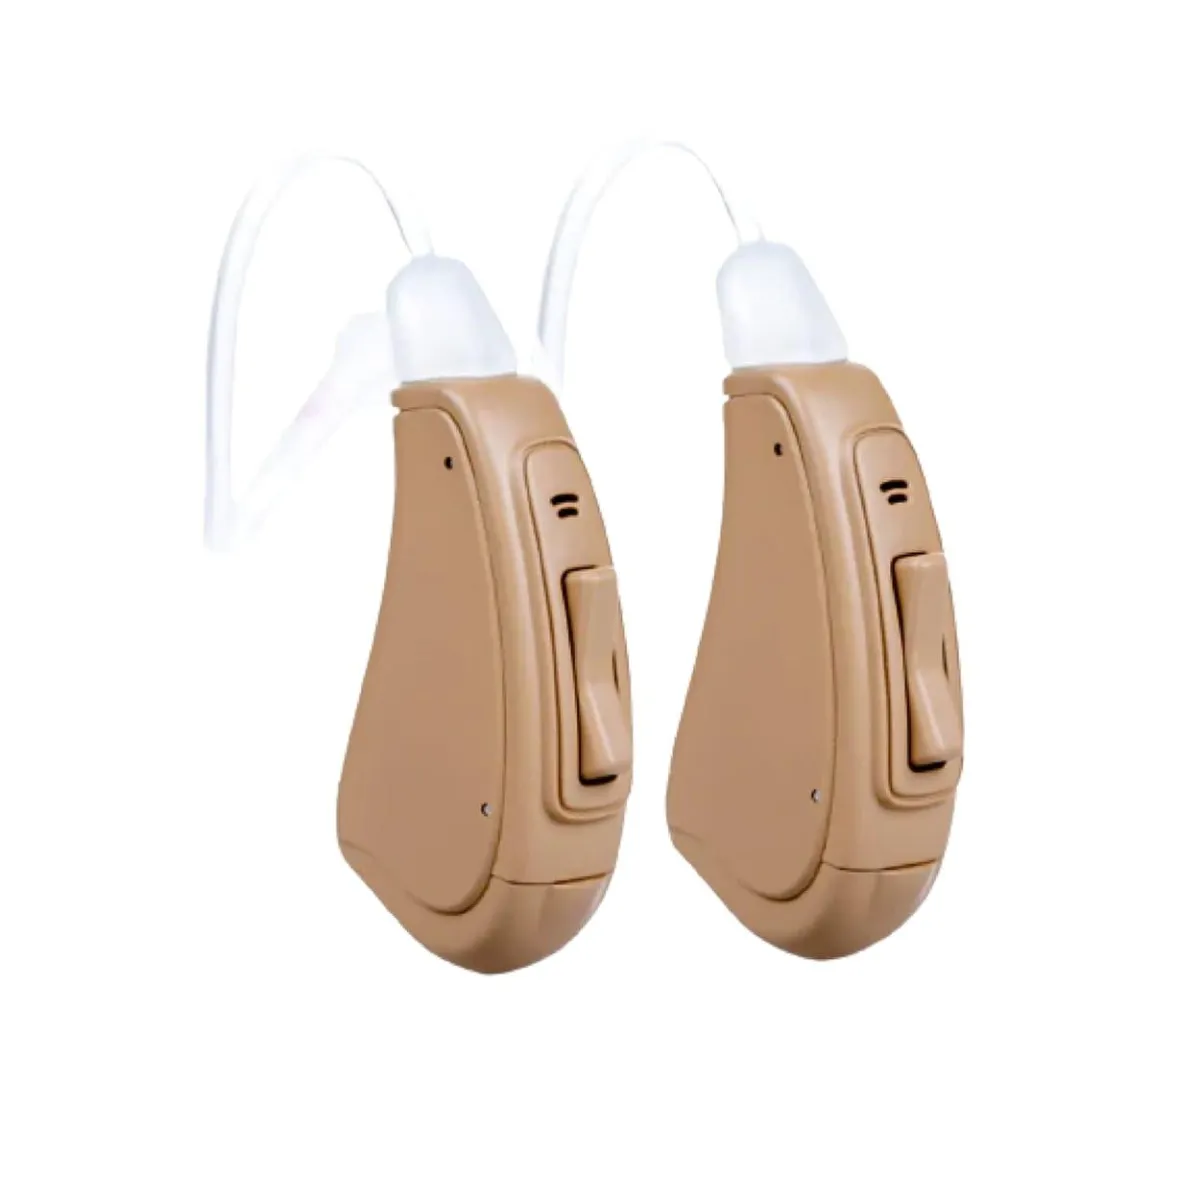 Otofonix Hearing Aids Sold Direct To The Consumer Mobile Website Image_elite_tiny_